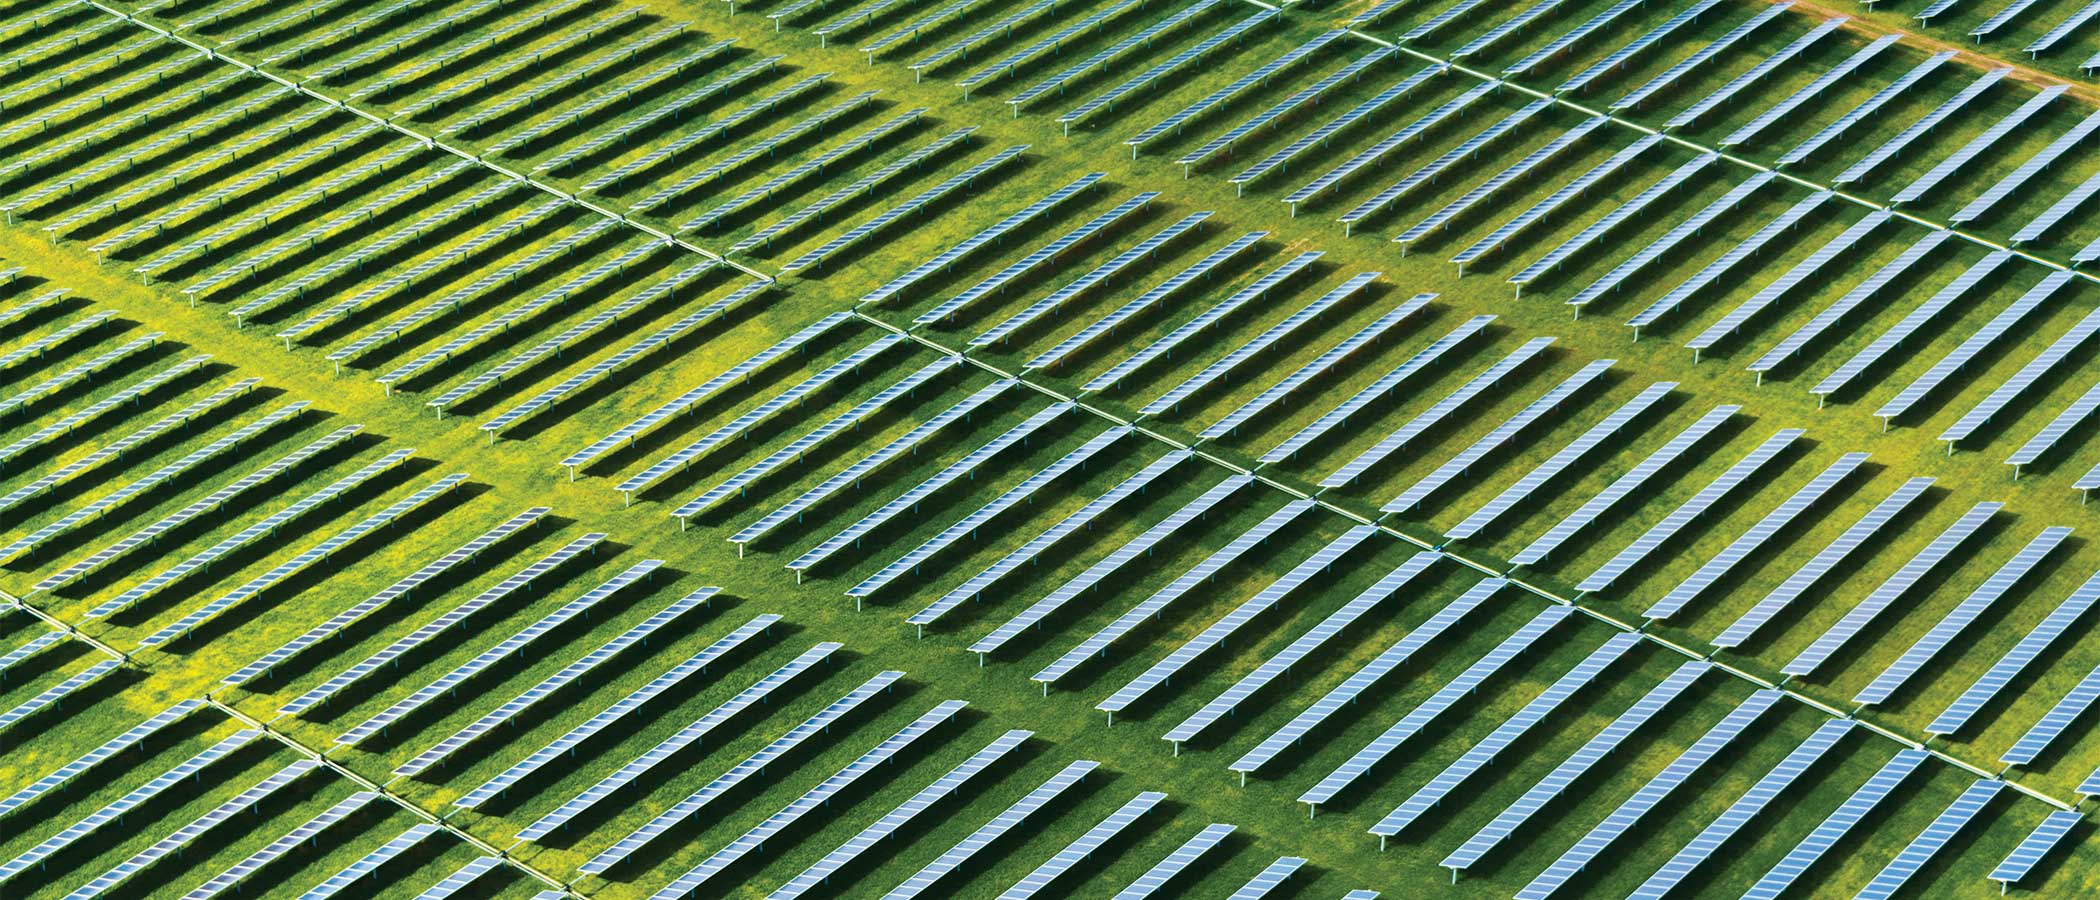 Aerial view of a solar farm with many rows of solar panels in a field.